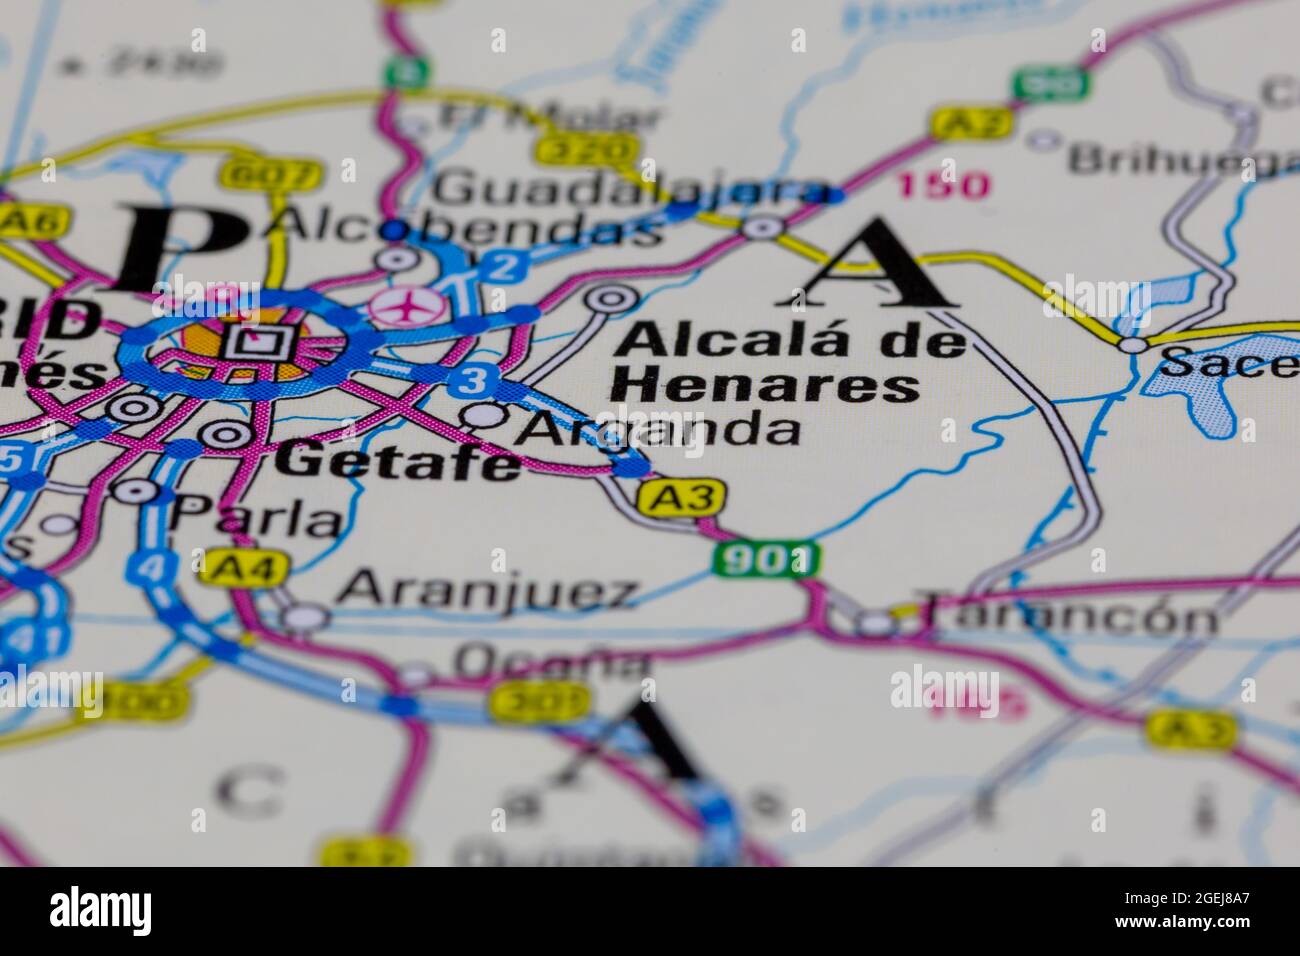 Arganda Spain shown on a road map or Geography map Stock Photo